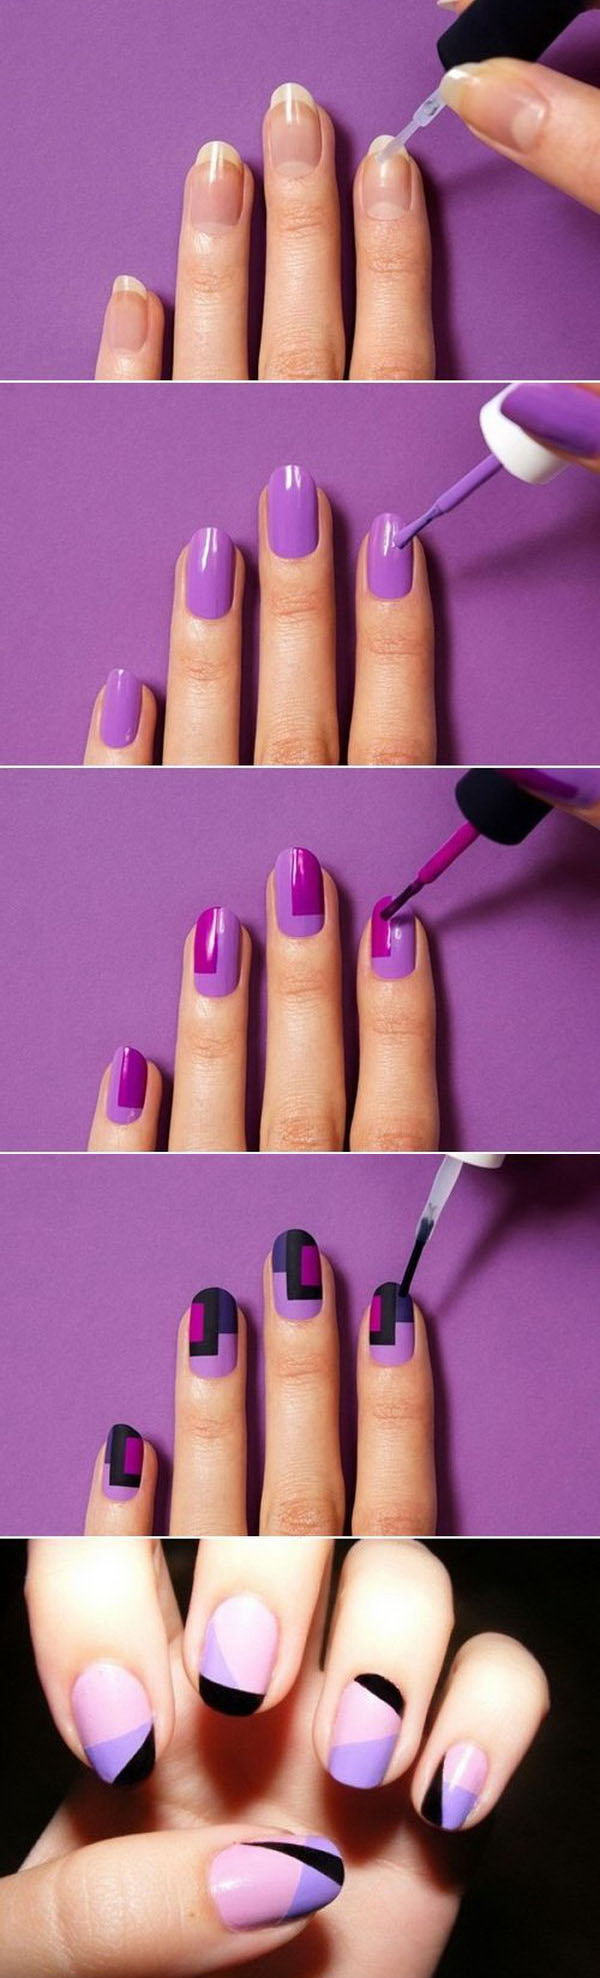 Easy And Fun Step By Step Nail Art Tutorials Noted List